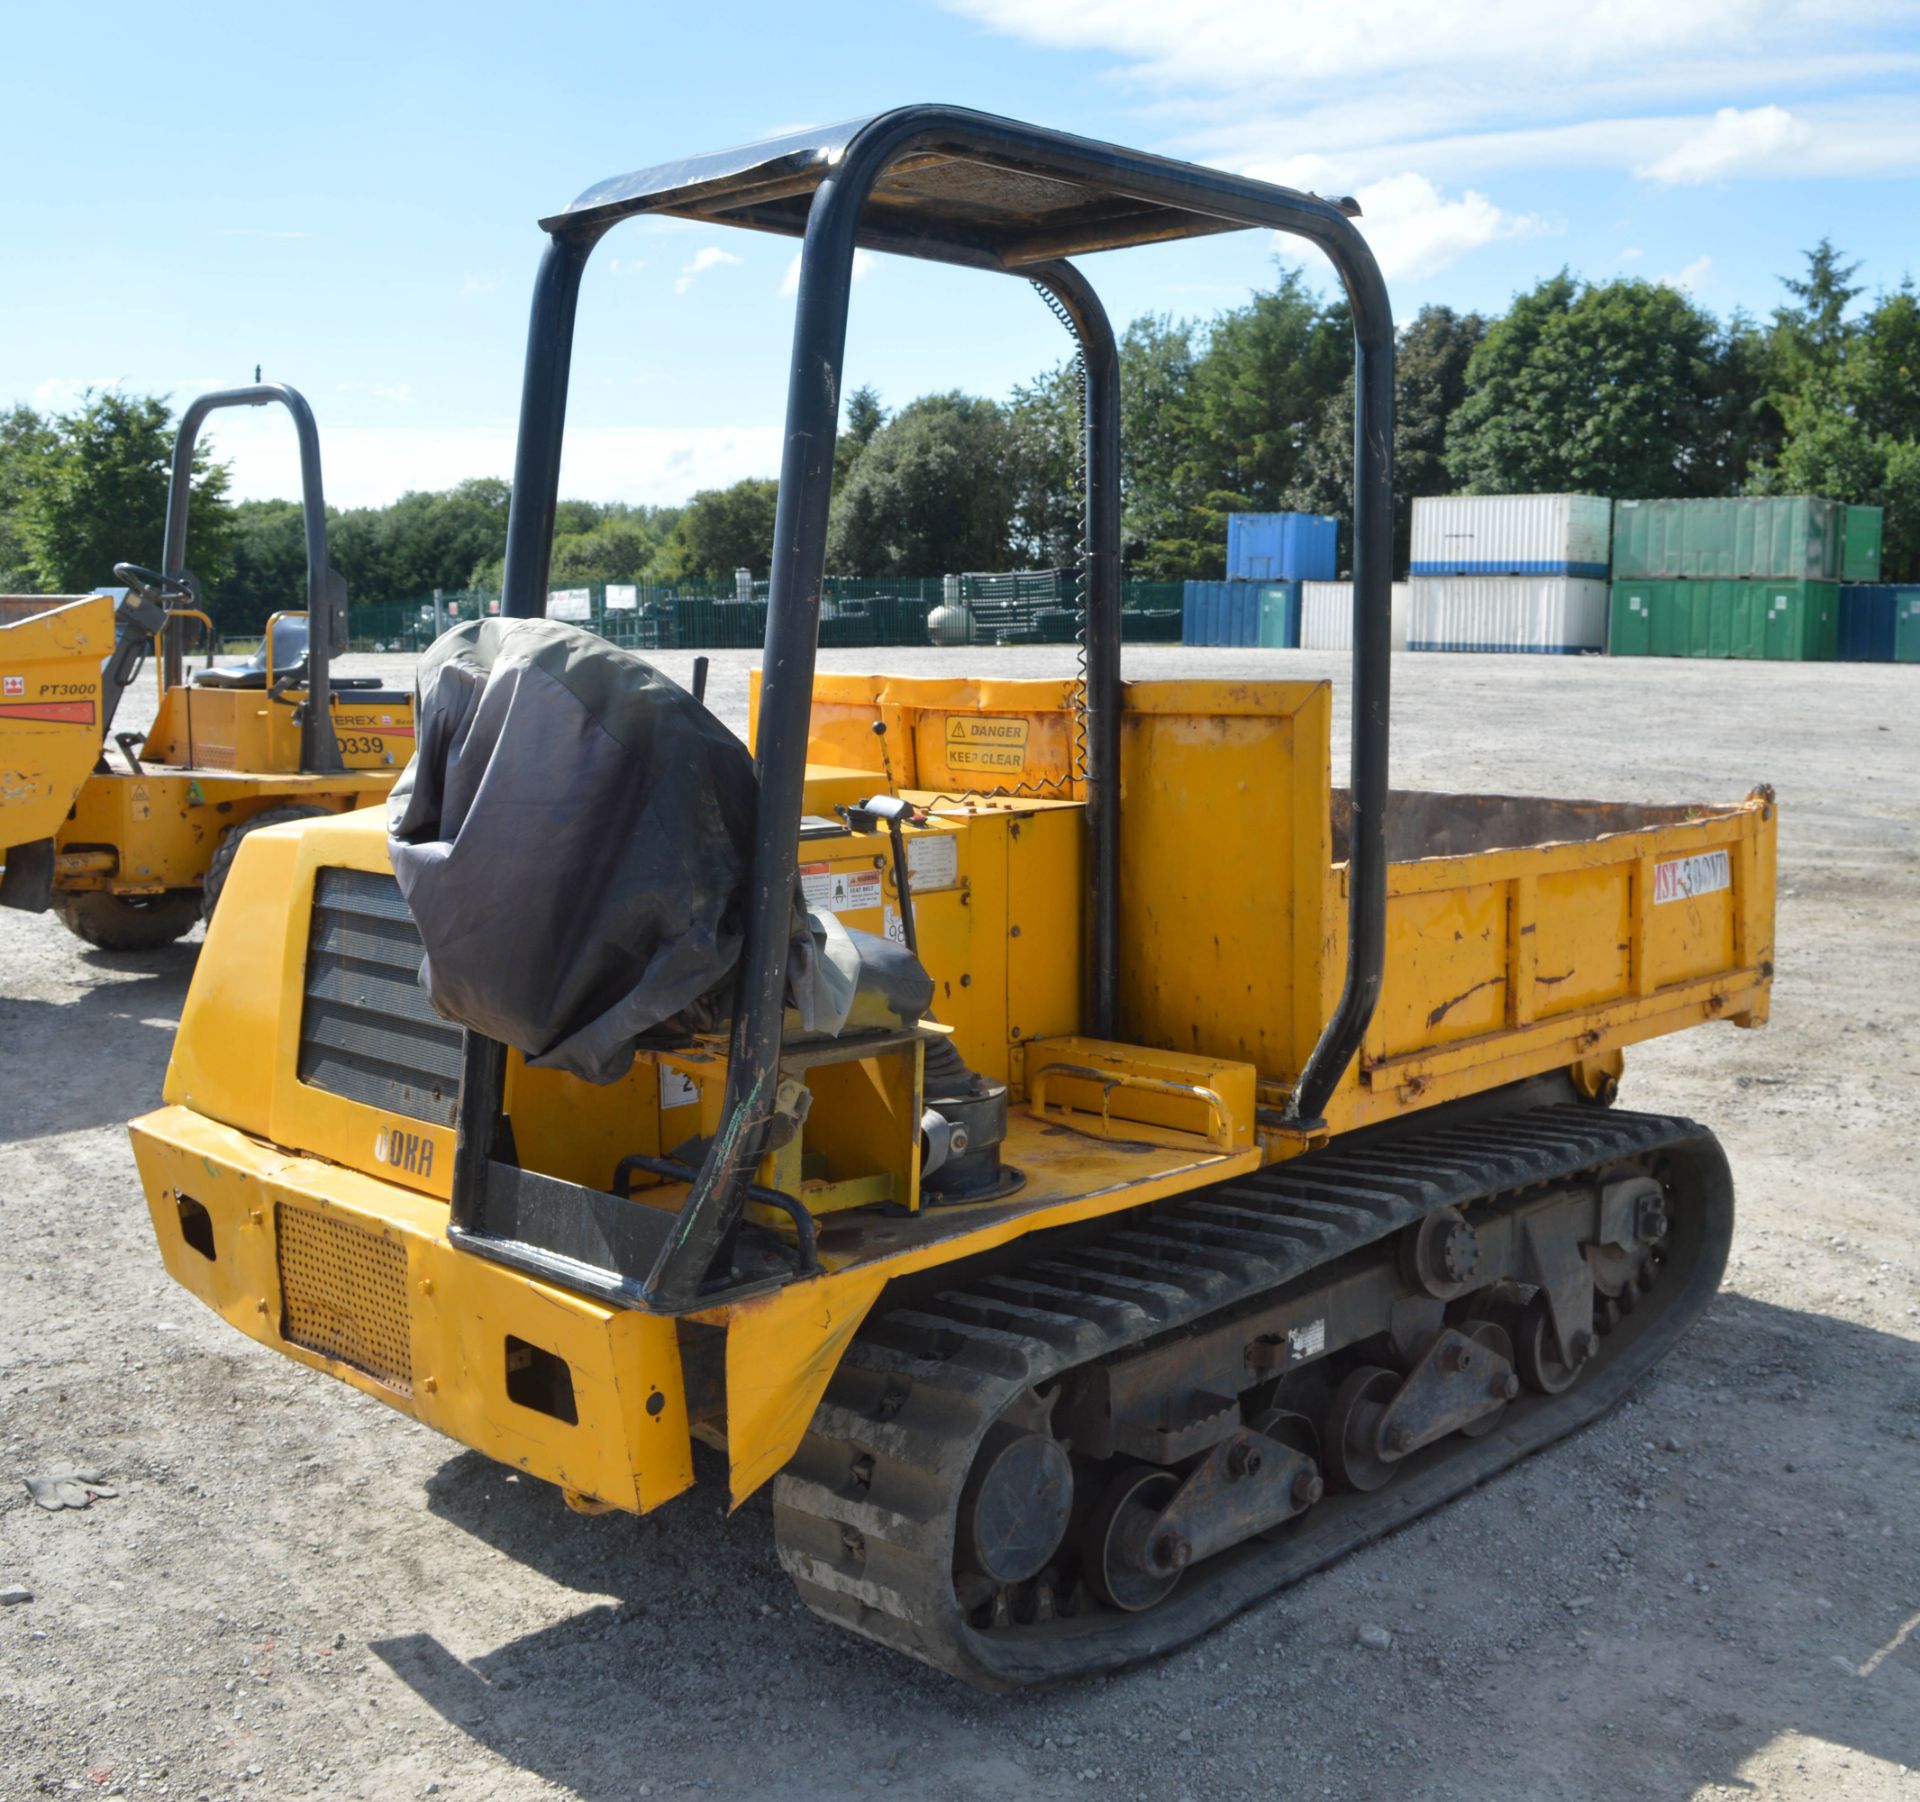 Morooka MST-300 VD rubber tracked straight skip dumper  S/N: 3320 Year: 2001 Recorded hours: 1408